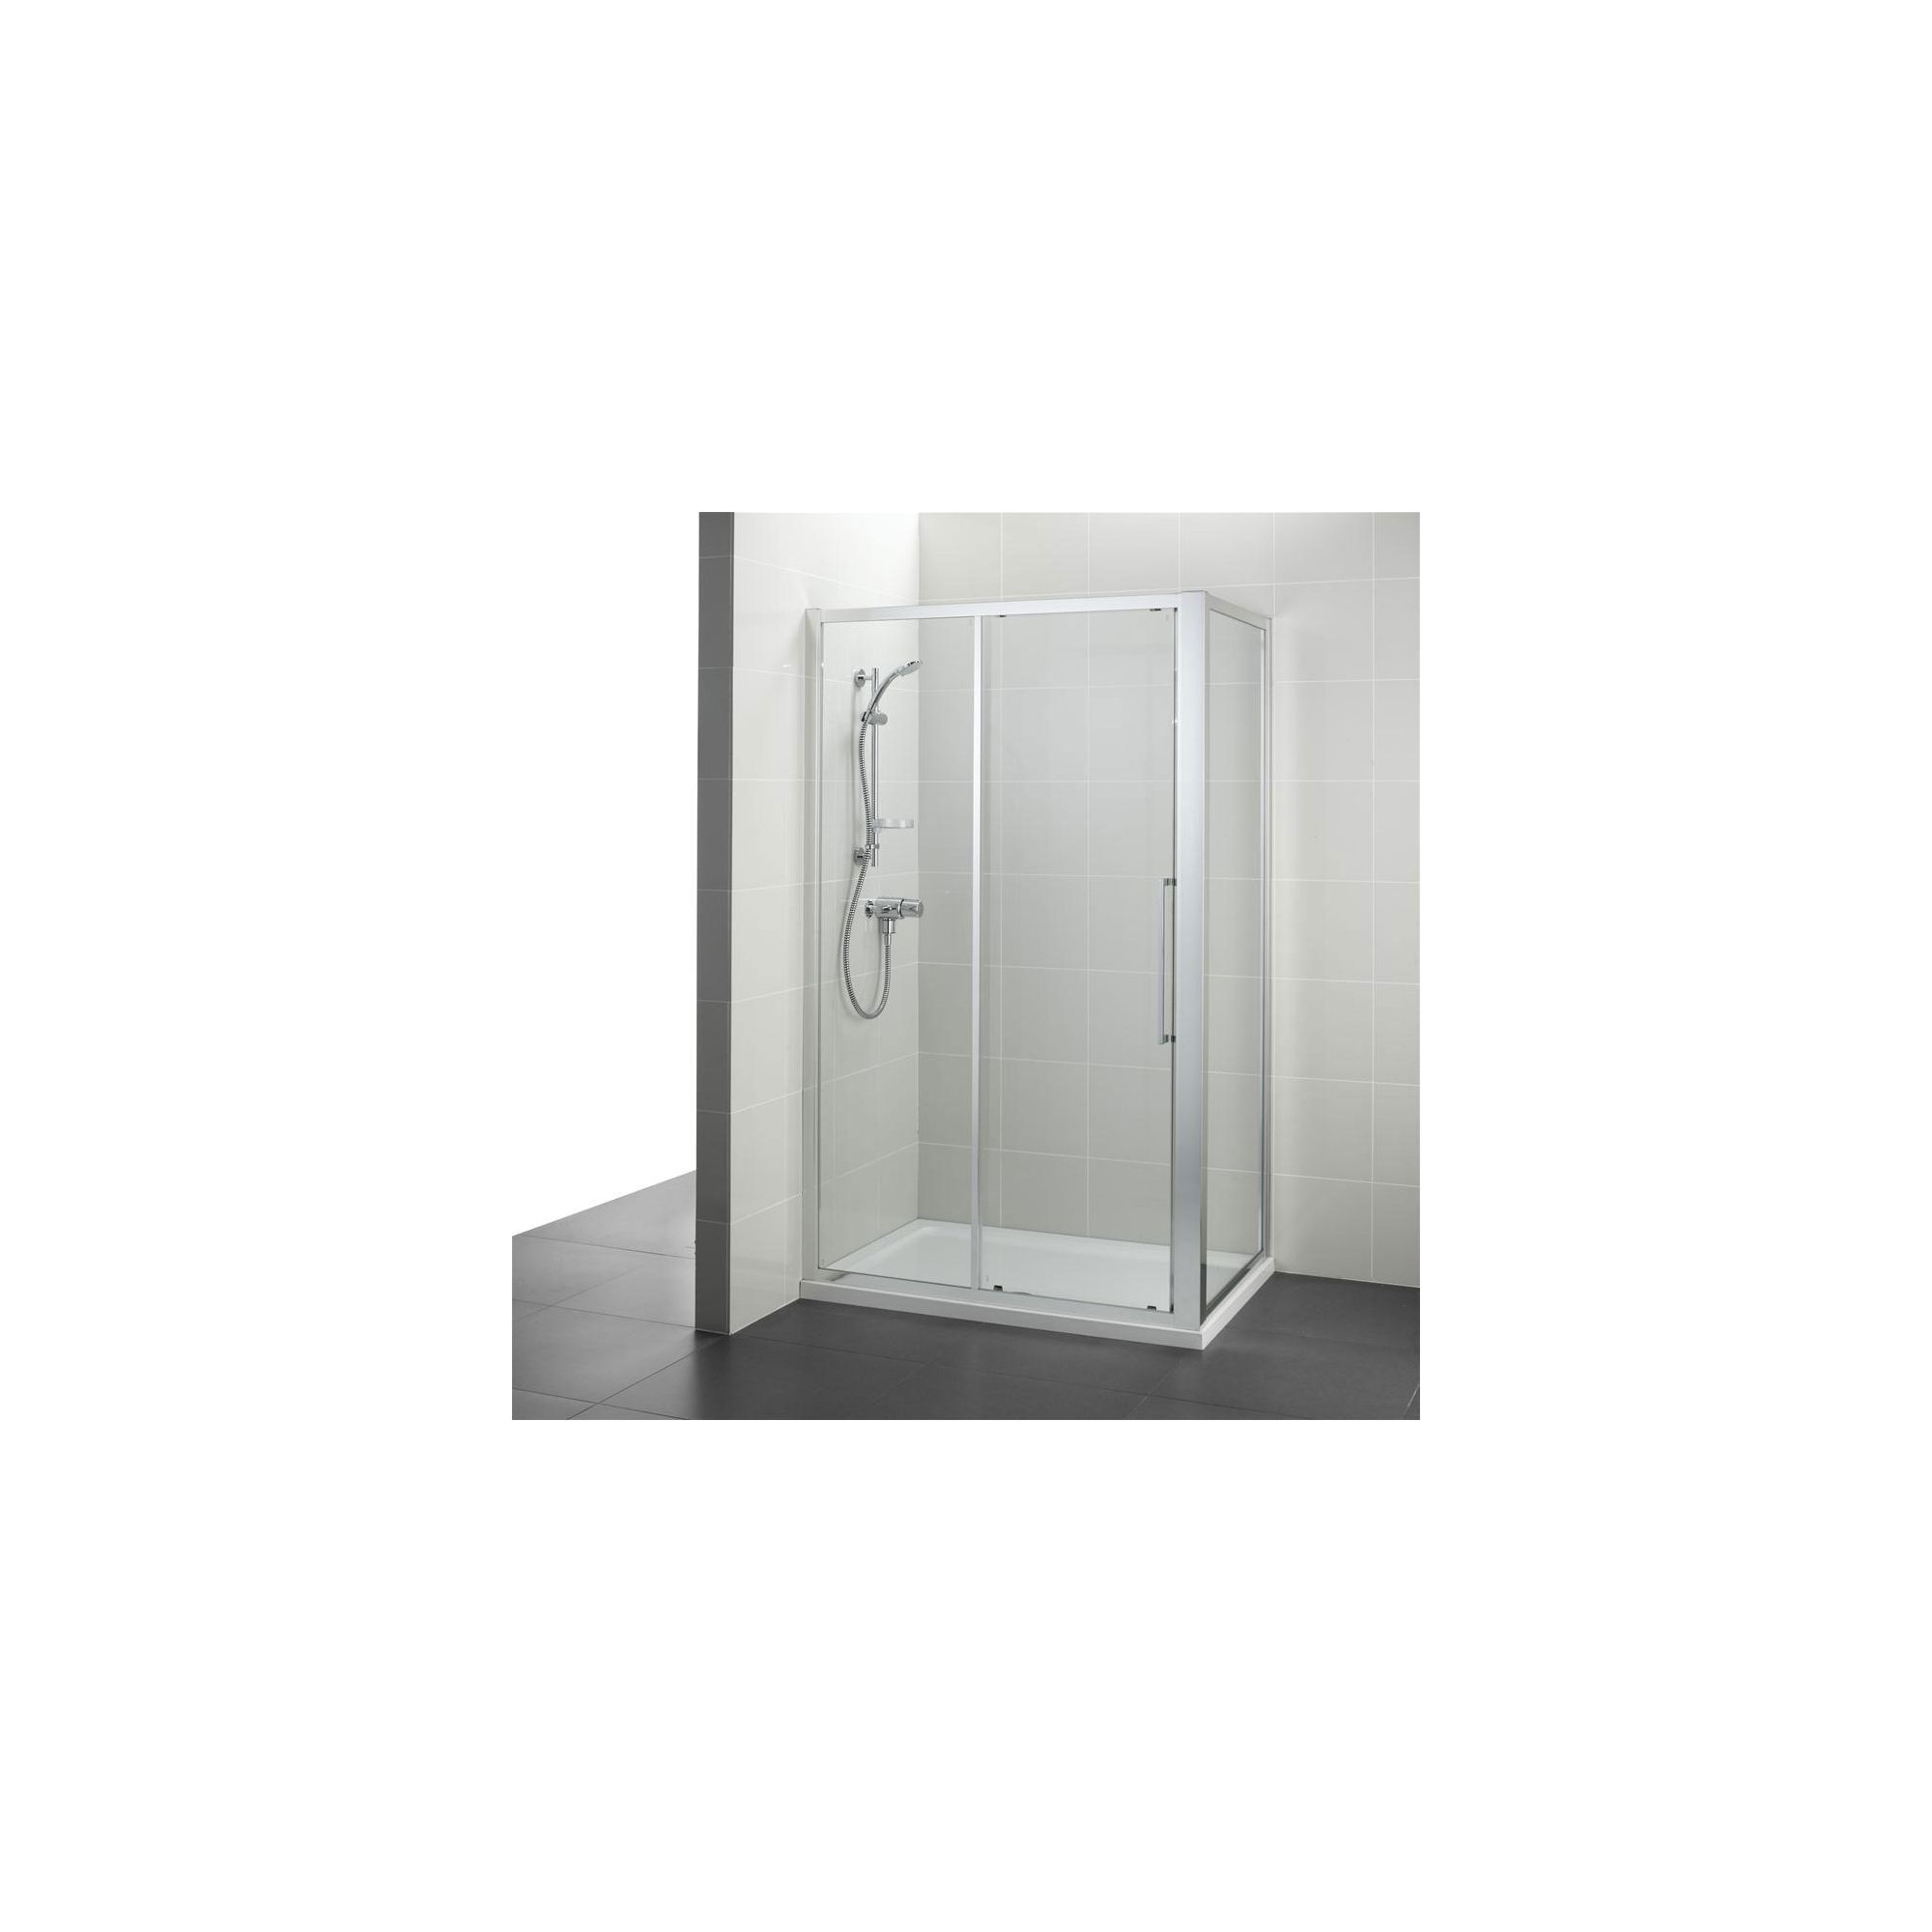 Ideal Standard Kubo Pivot Door Shower Enclosure, 900mm x 760mm, Bright Silver Frame, Low Profile Tray at Tesco Direct